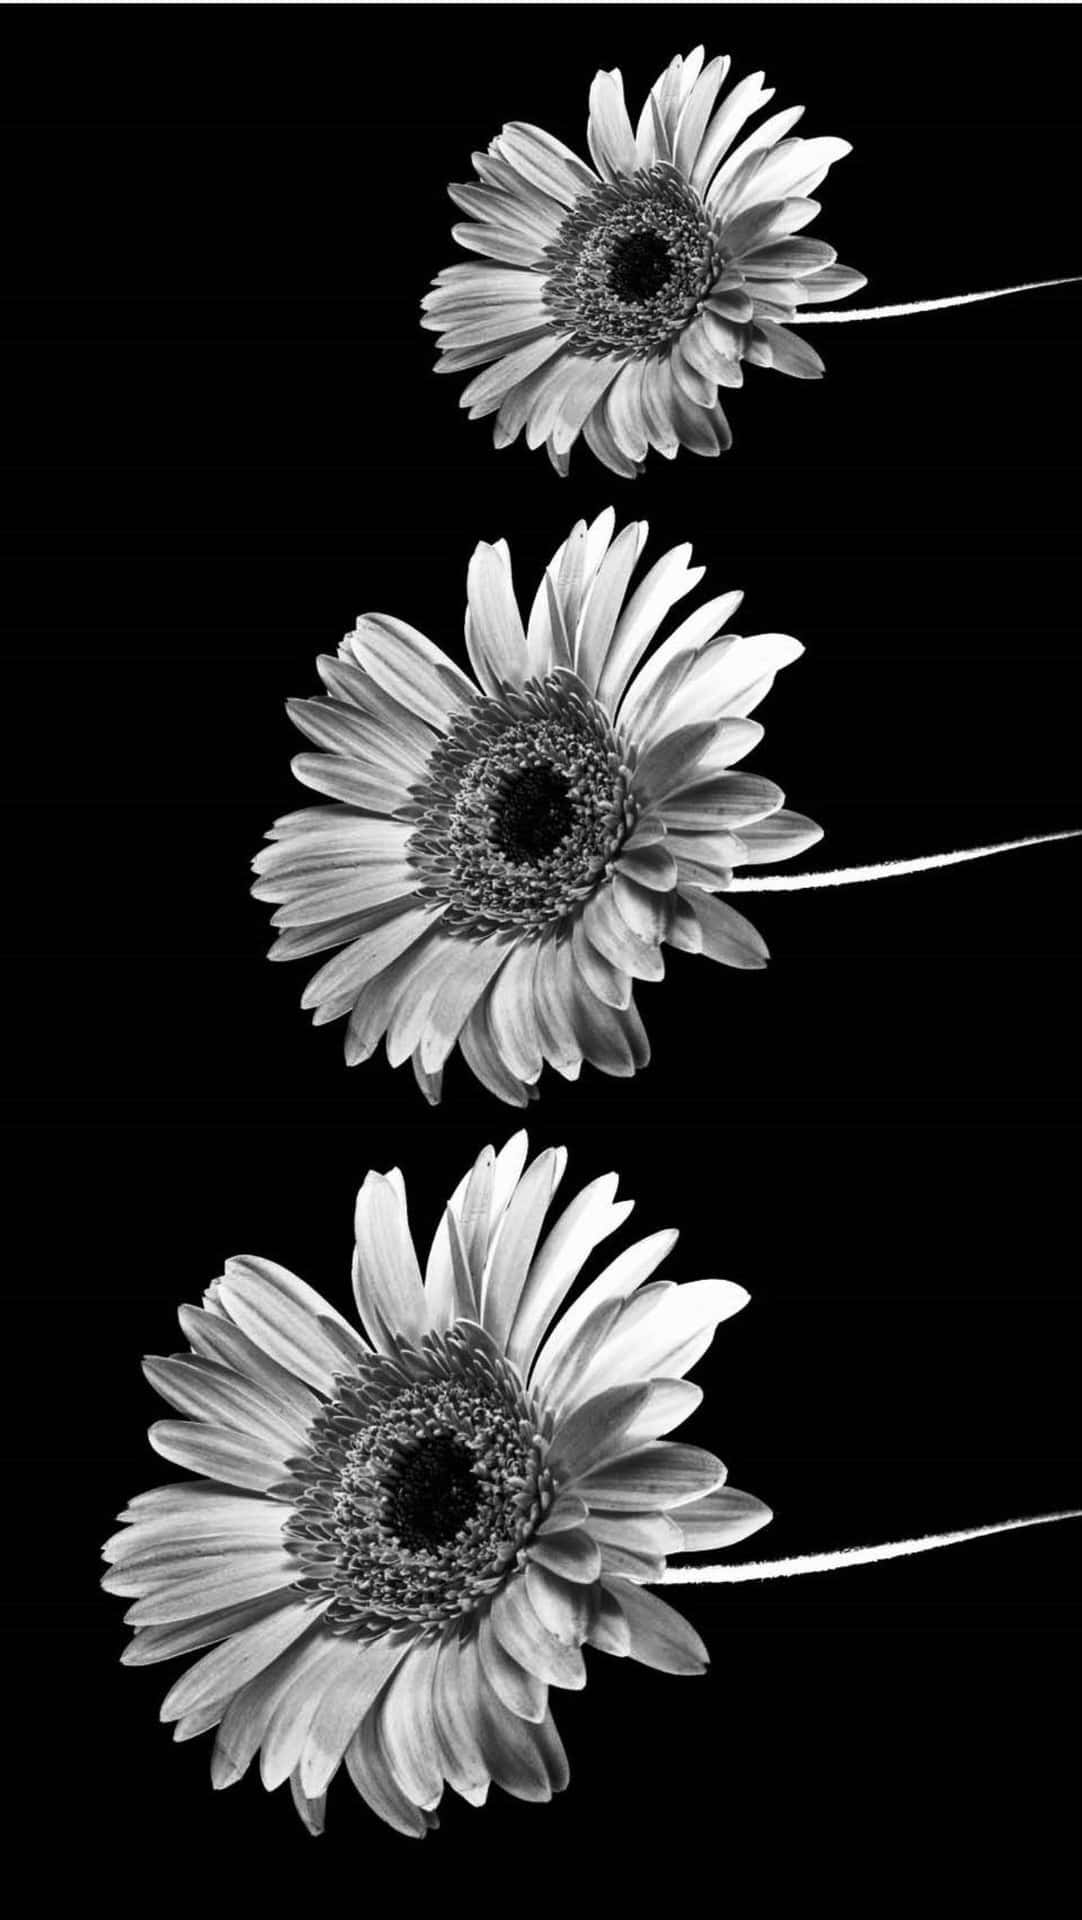 Black And White Three Daisy Flower Iphone Wallpaper